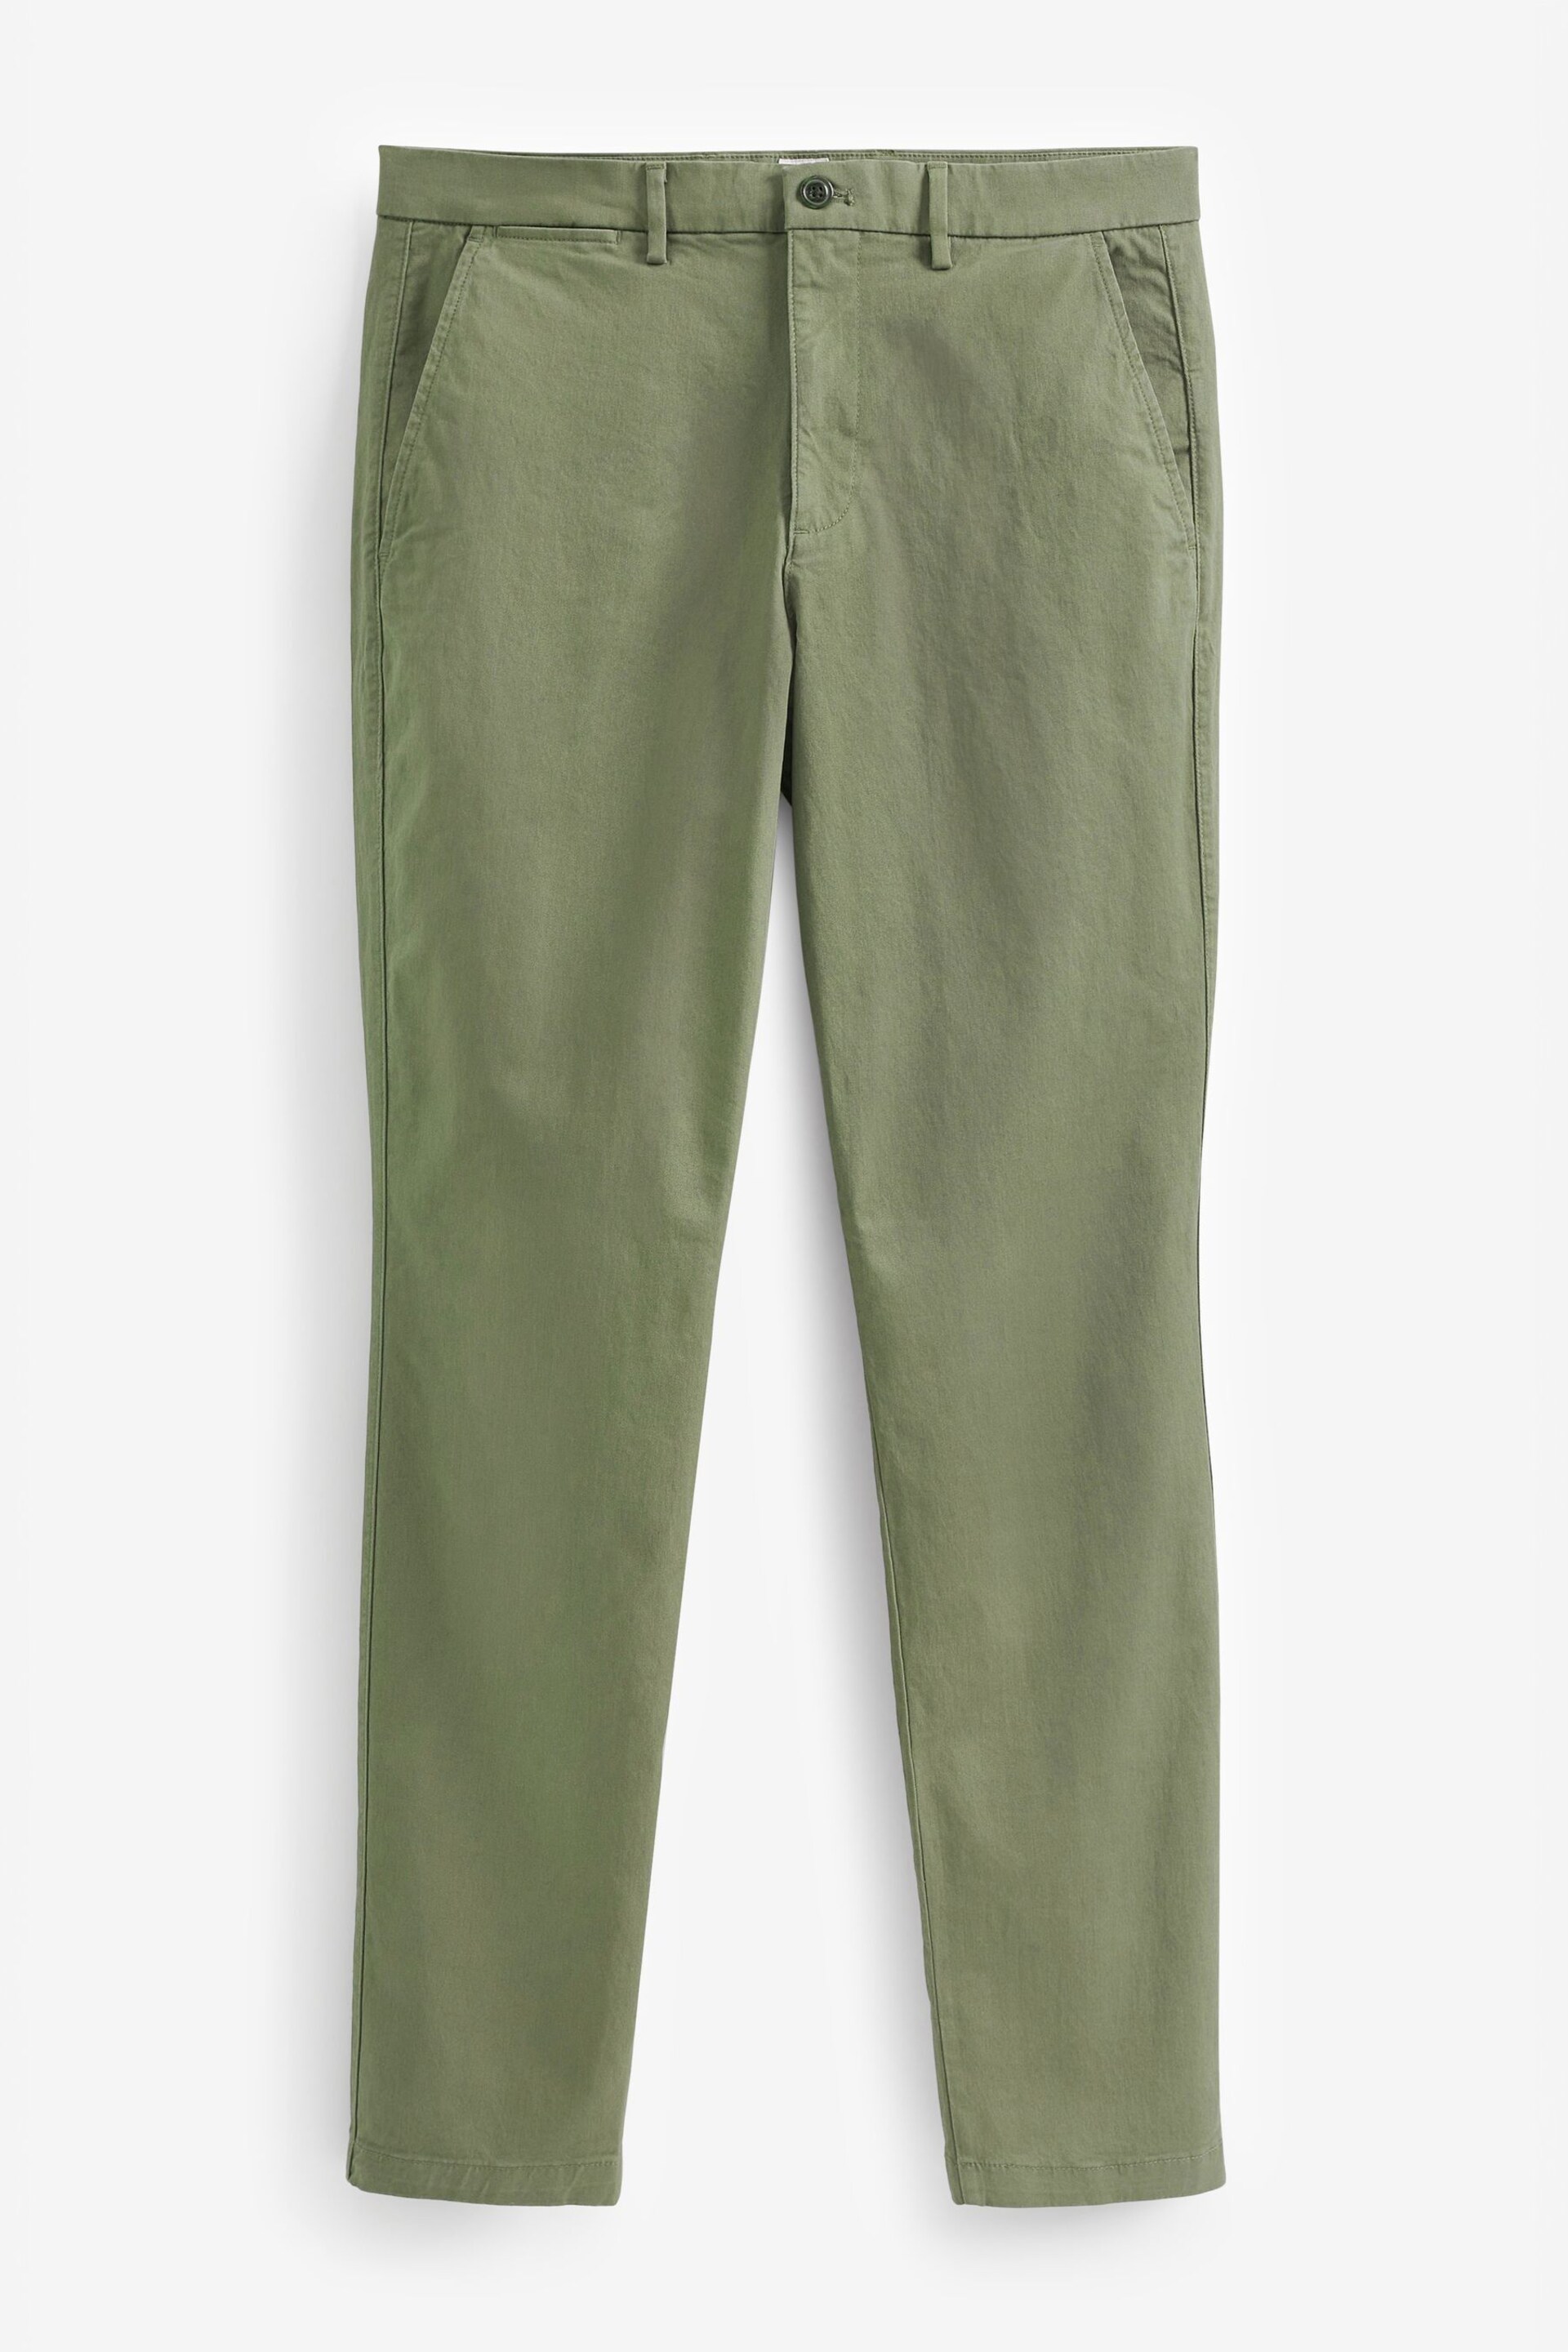 Gap Green Straight Taper Fit Essential Chinos - Image 4 of 4